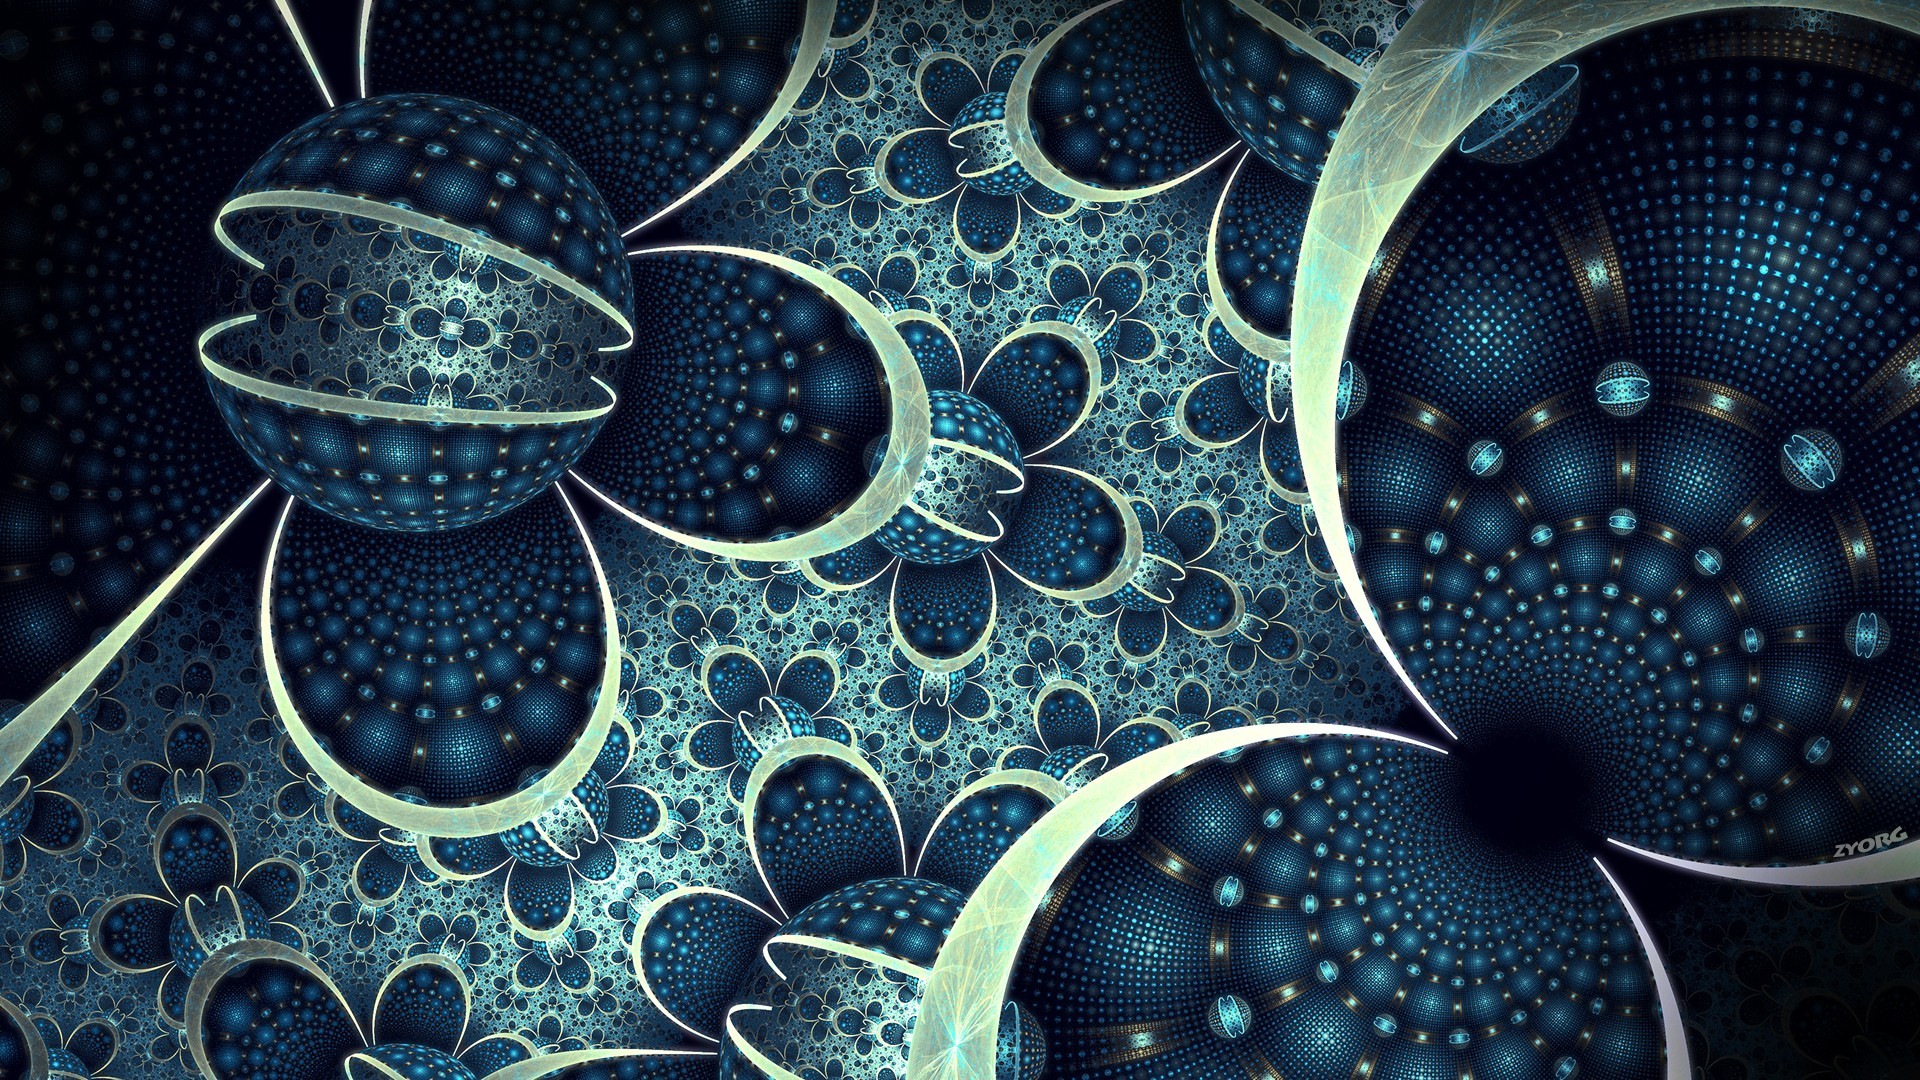 1920x1080 Straddle the Line Between Maths and Art with These Fractal Wallpapers